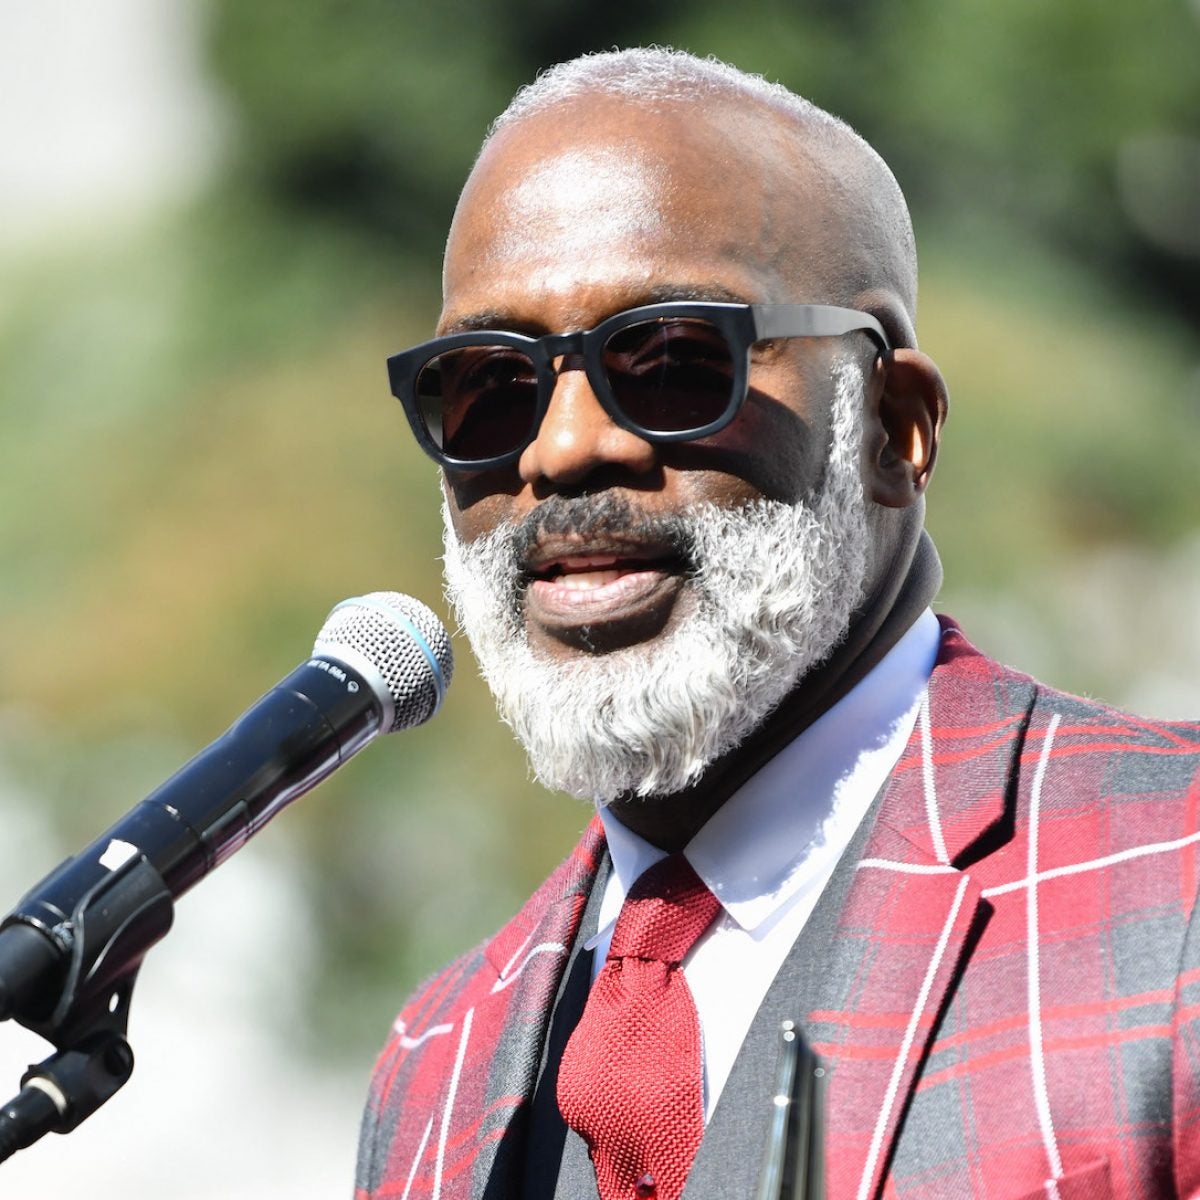 BeBe Winans Reveals He, His Mother And Brother All Contracted COVID-19